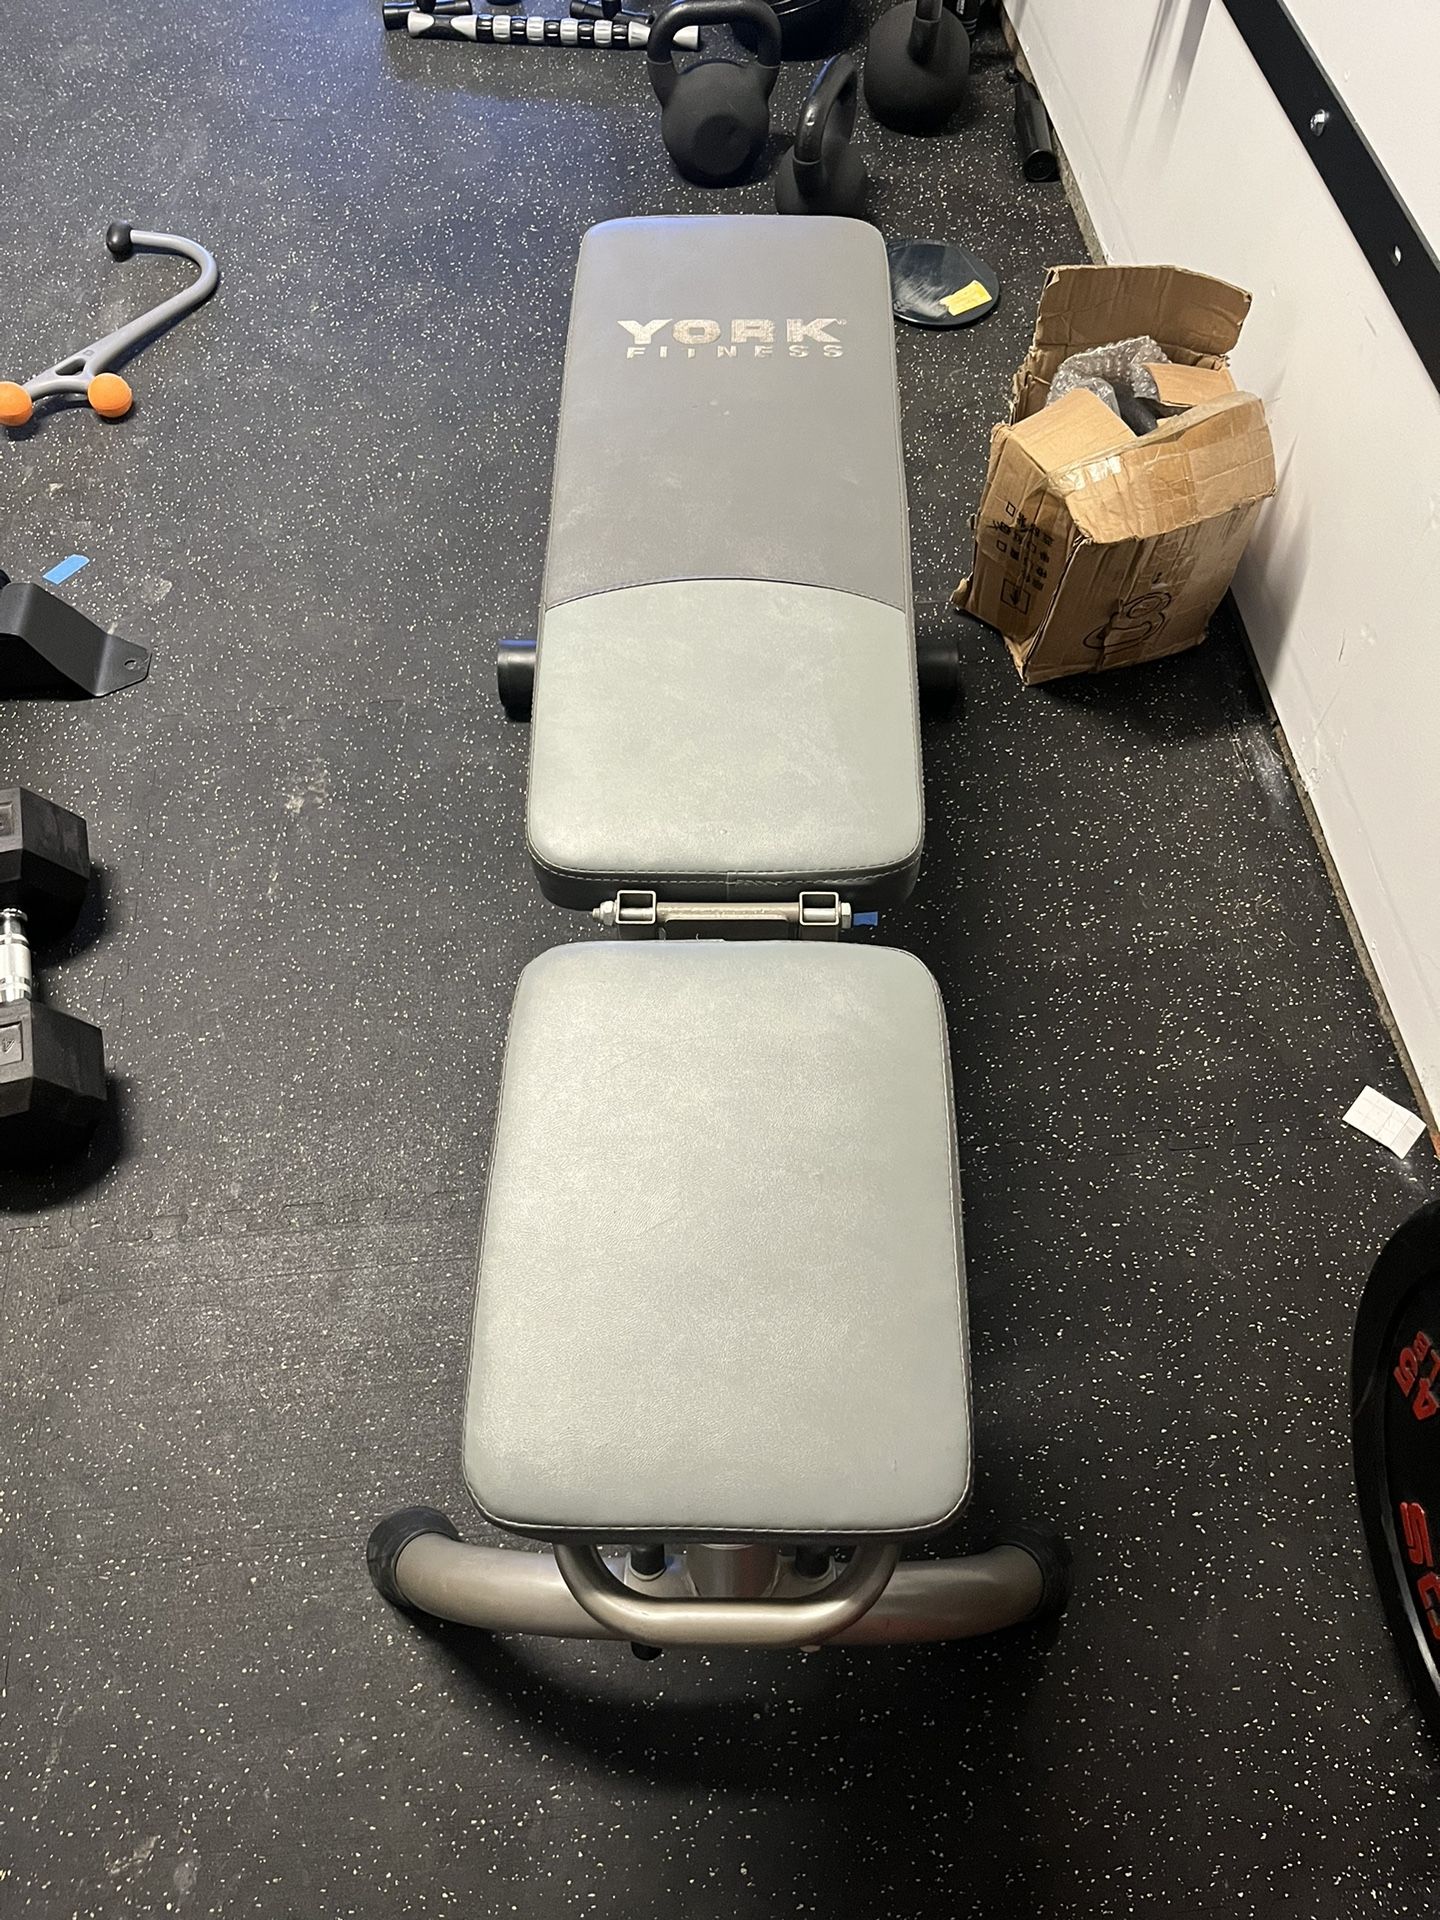 York Fitness Workout Gym Bench 